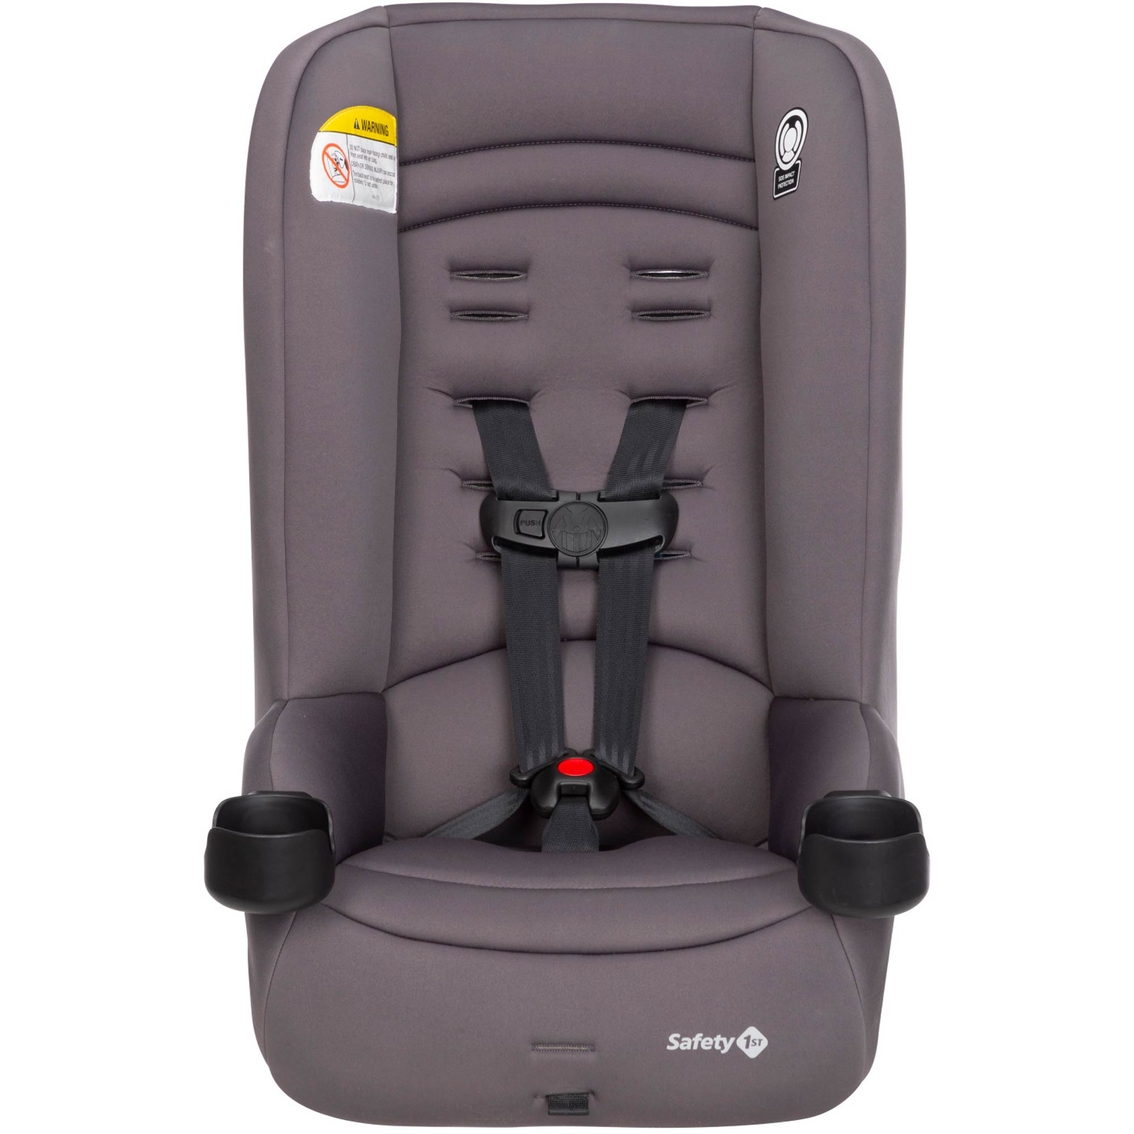 Safety 1st Jive 2 in 1 Convertible Car Seat - Image 9 of 10